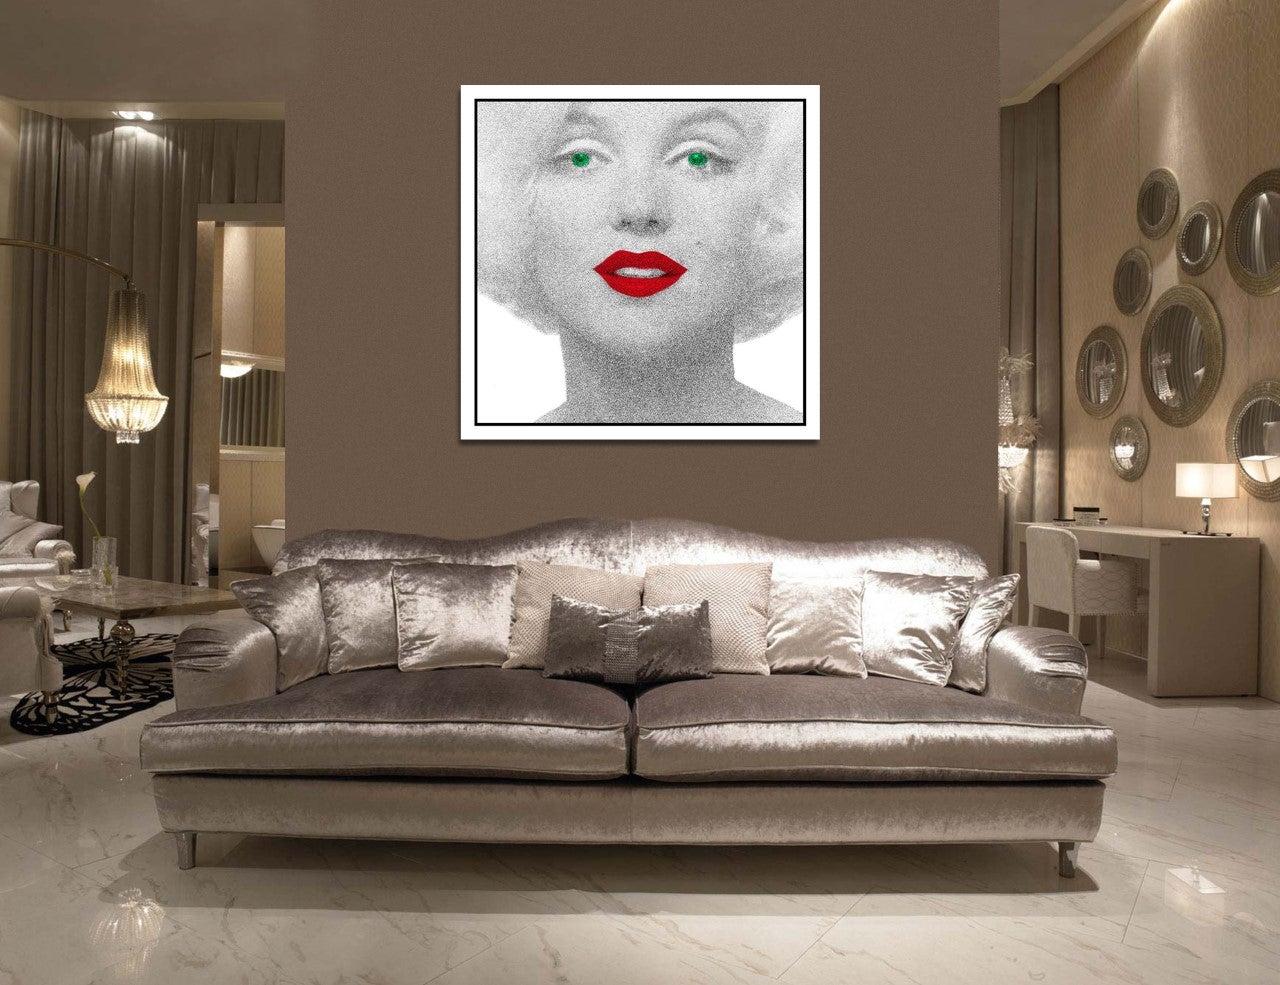 Celebrating the one and only Marilyn Monroe in this unique series by Mauro Oliveira. 

Limited edition of 30 museum quality Giclee prints on CANVAS, signed and numbered by the artist.

A 